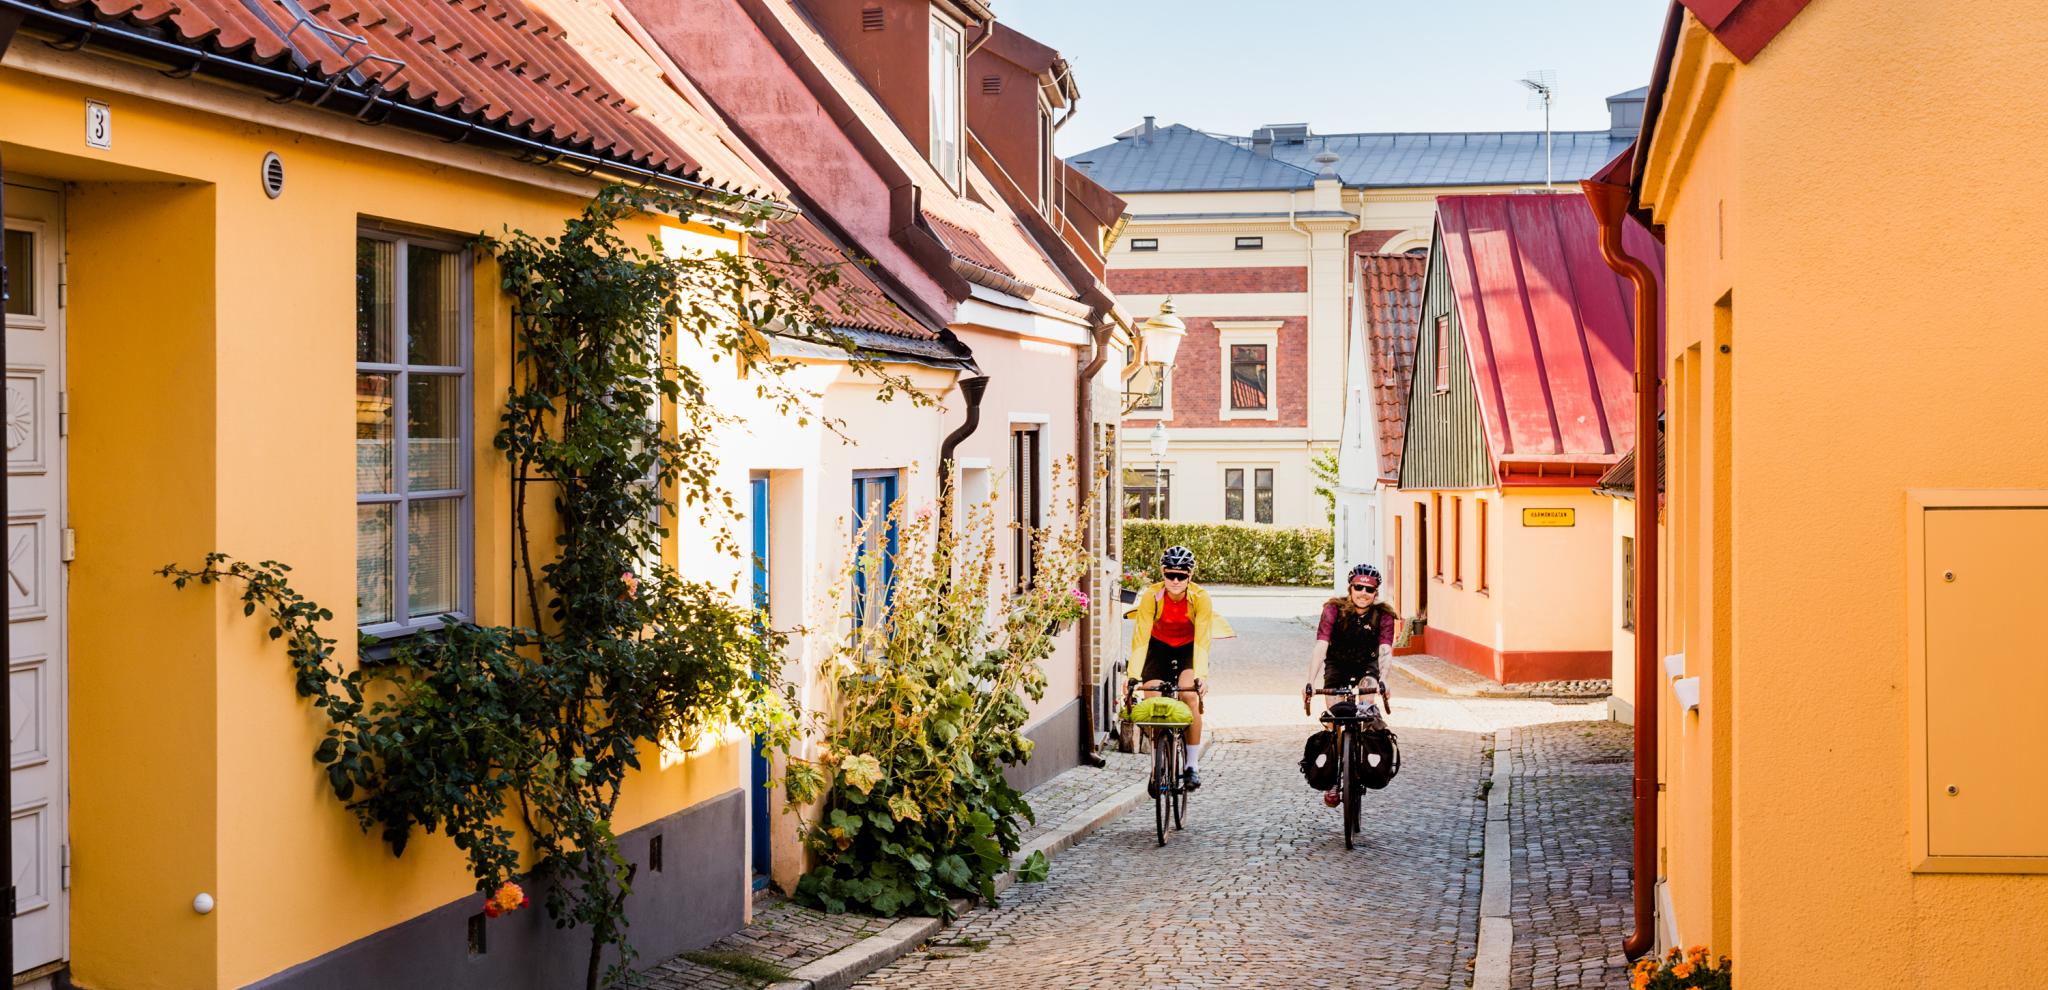 Bicyclists in heritage village of Ystad